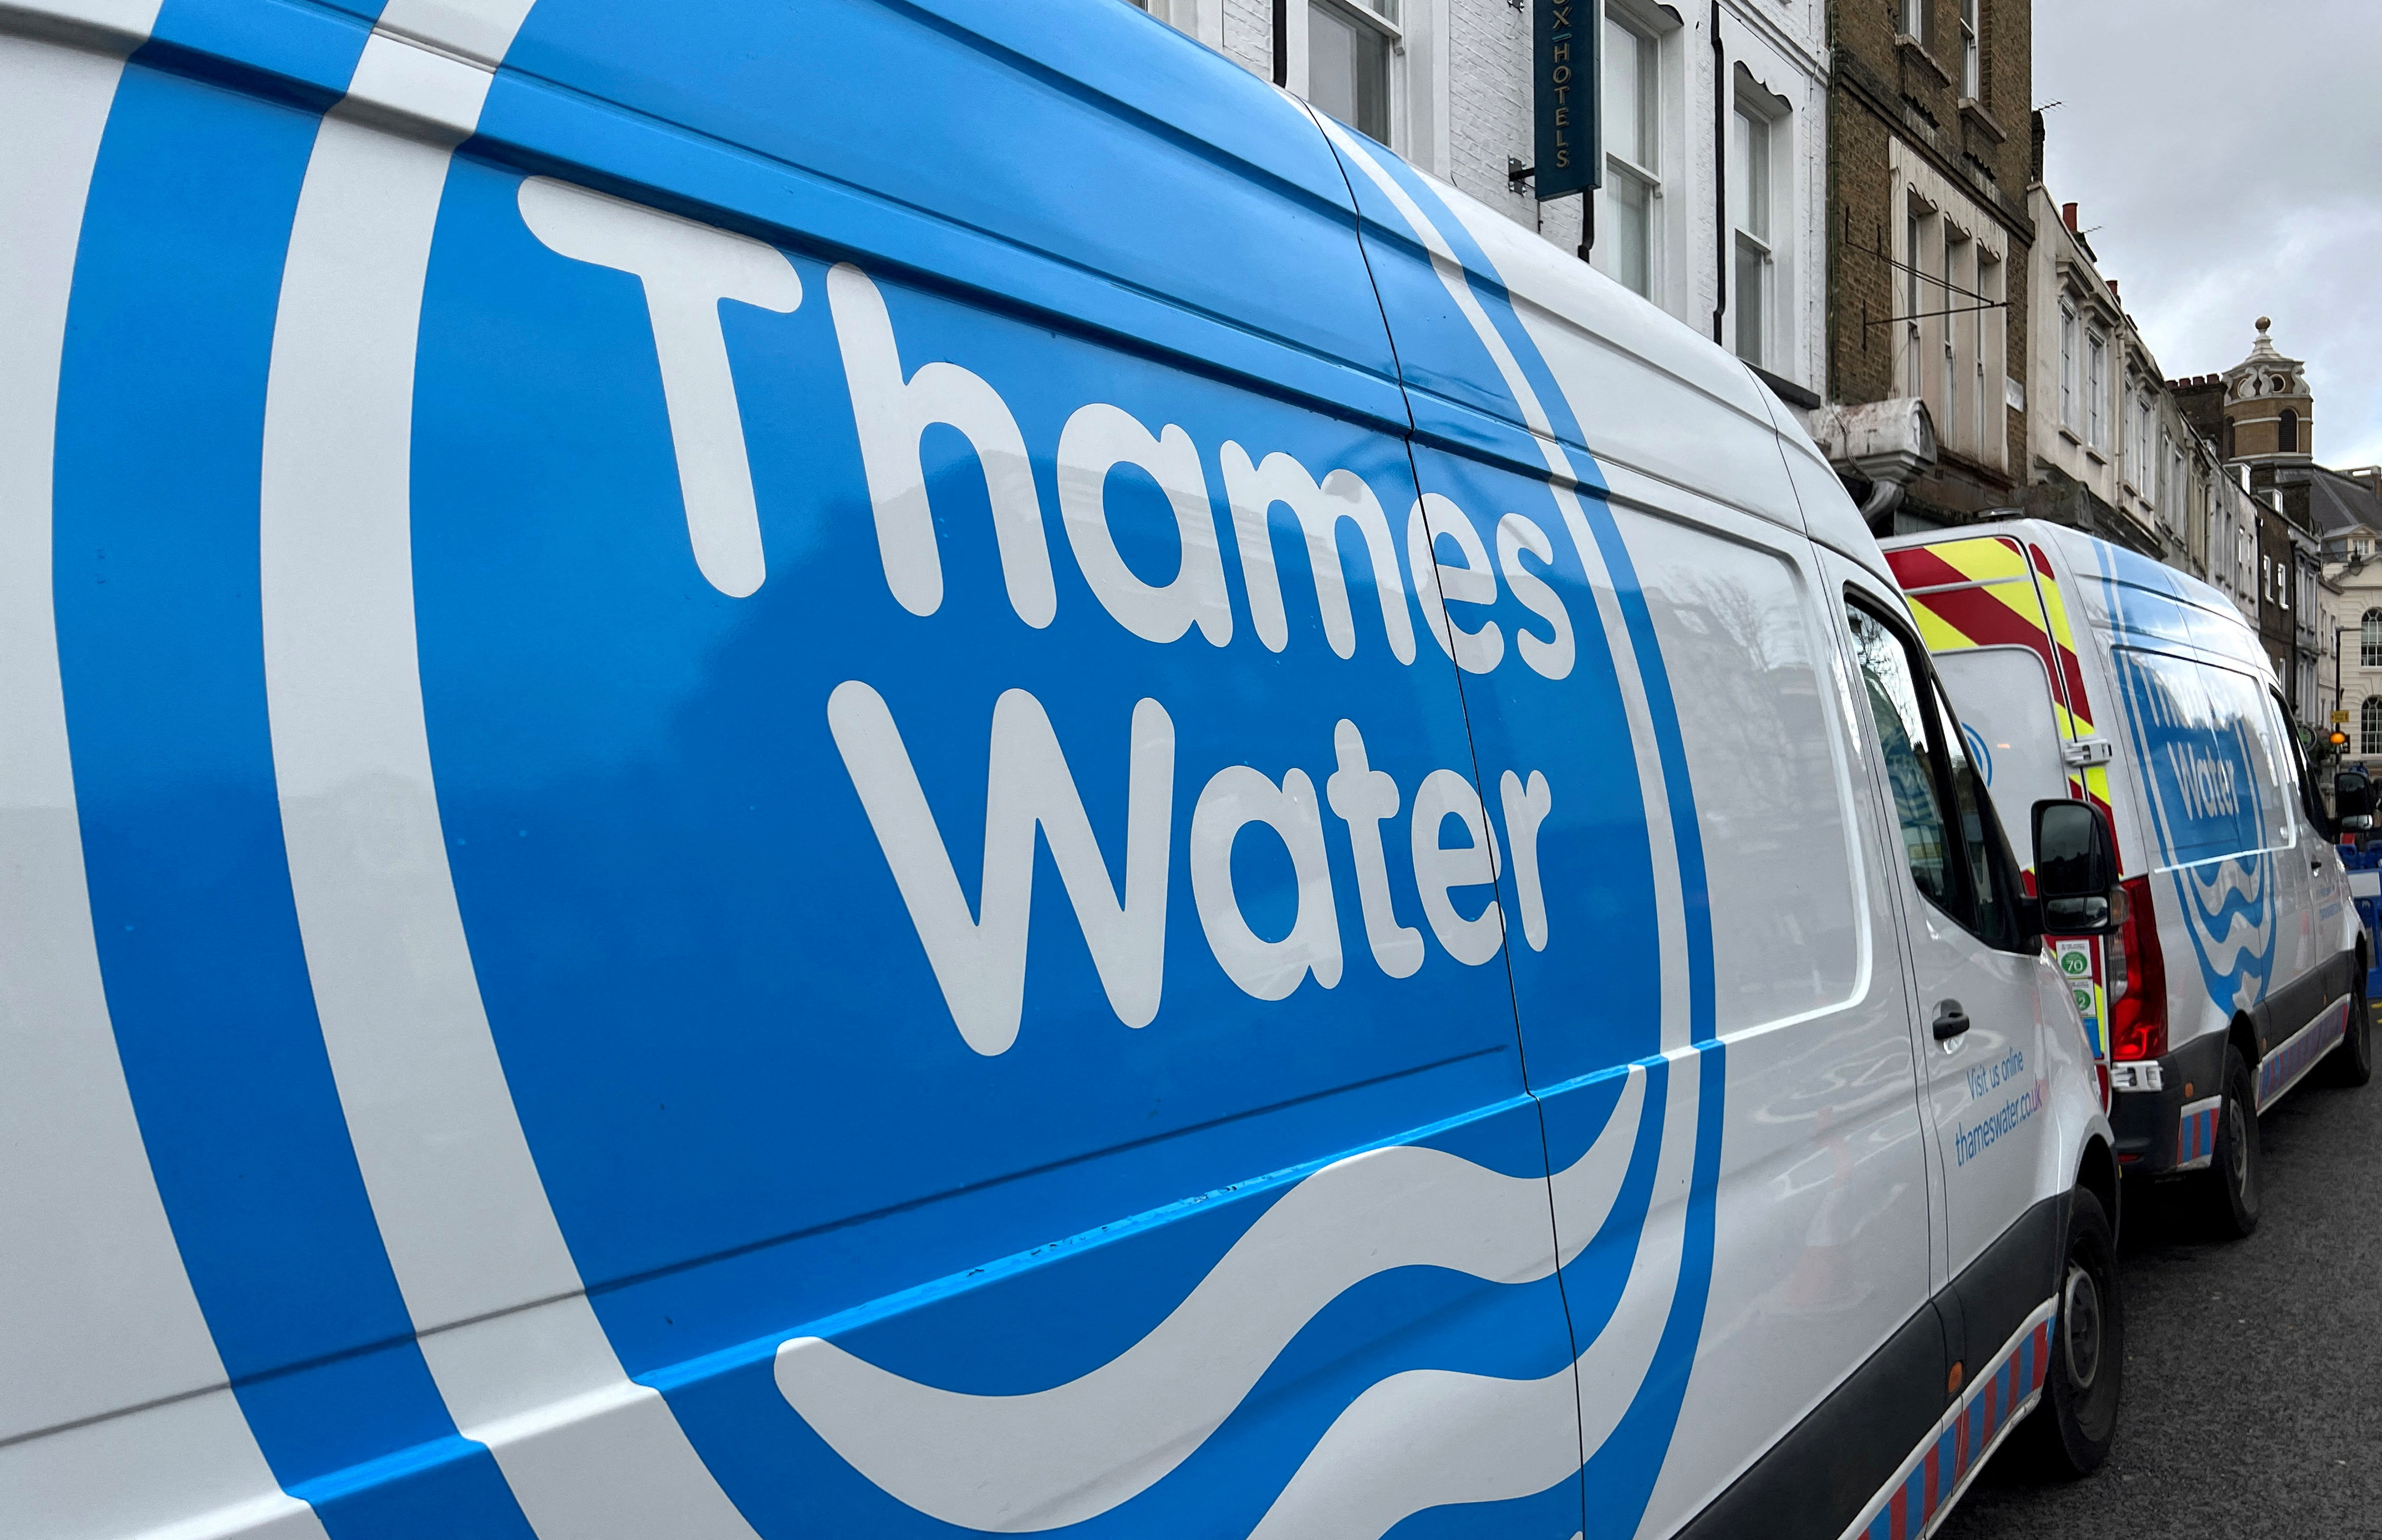 Thames Water customers face being hit with bills of £52 a month